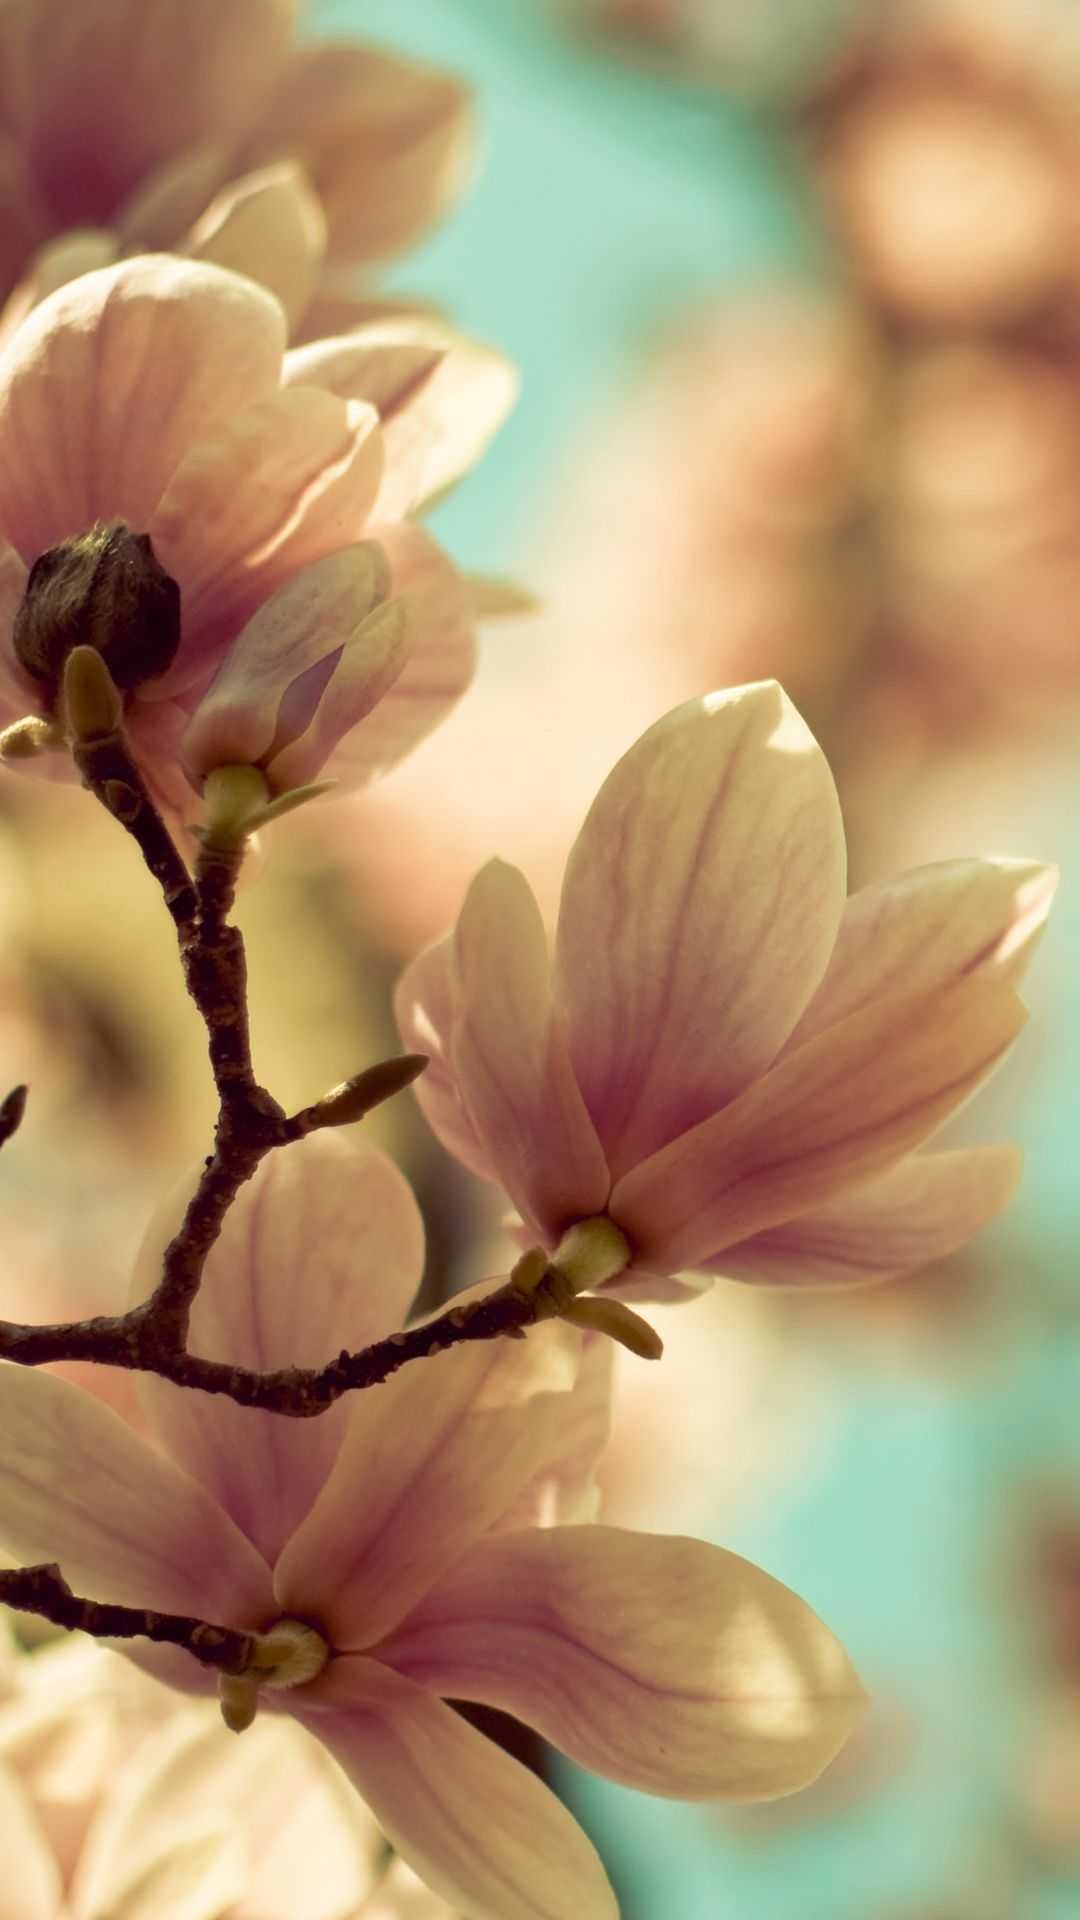 Magnolia wallpaper, Awesome free wallpapers, HD quality, Stunning floral, 1080x1920 Full HD Handy